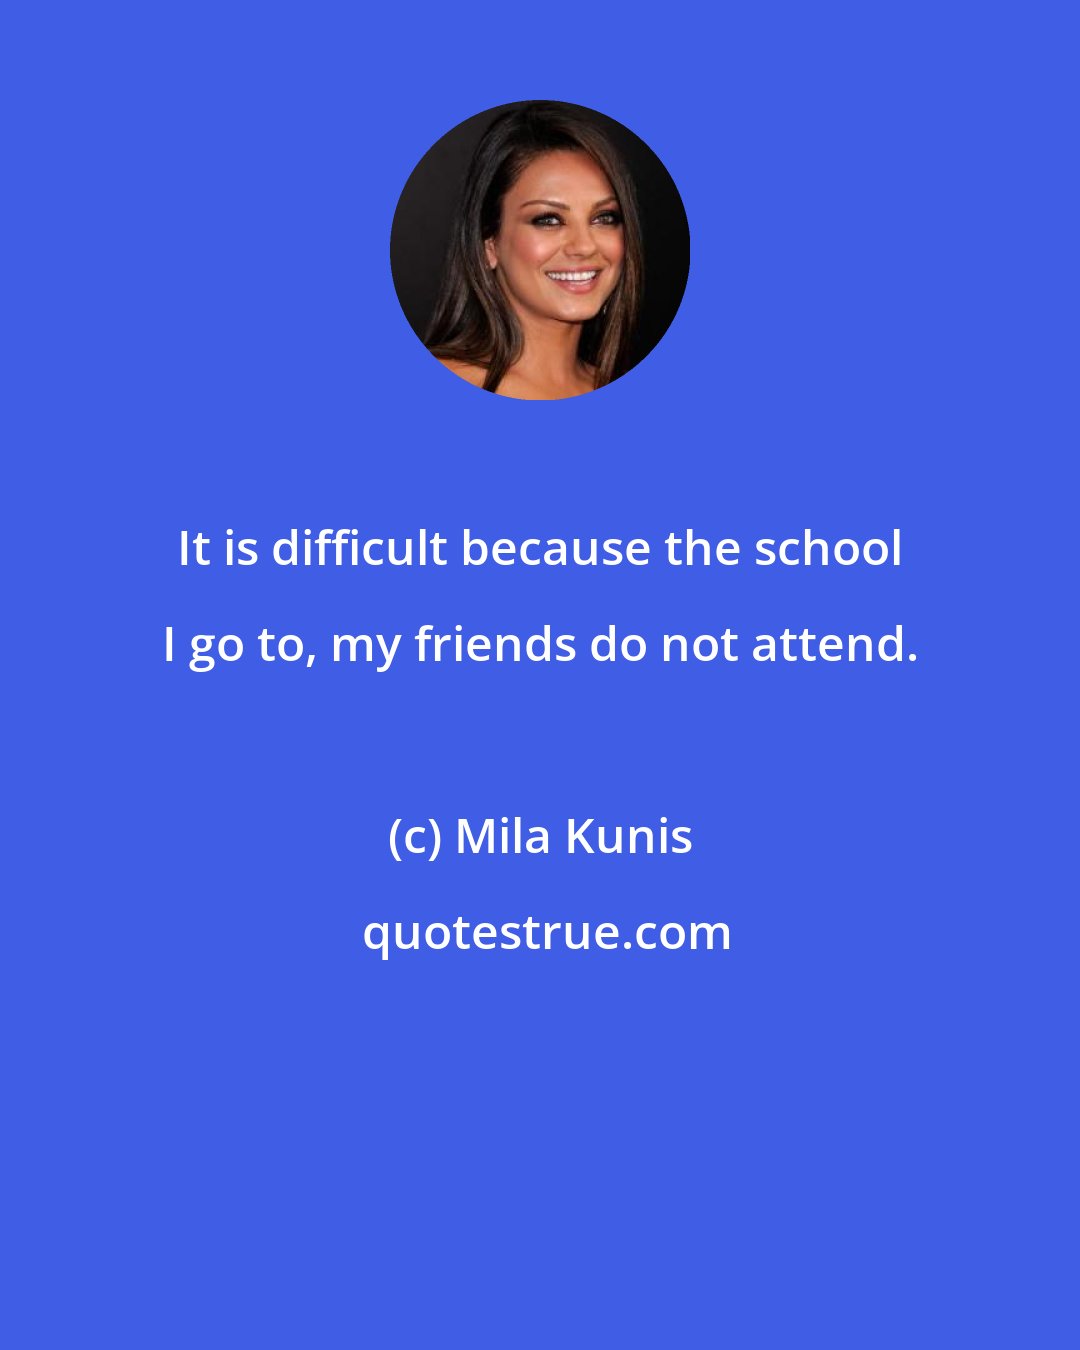 Mila Kunis: It is difficult because the school I go to, my friends do not attend.